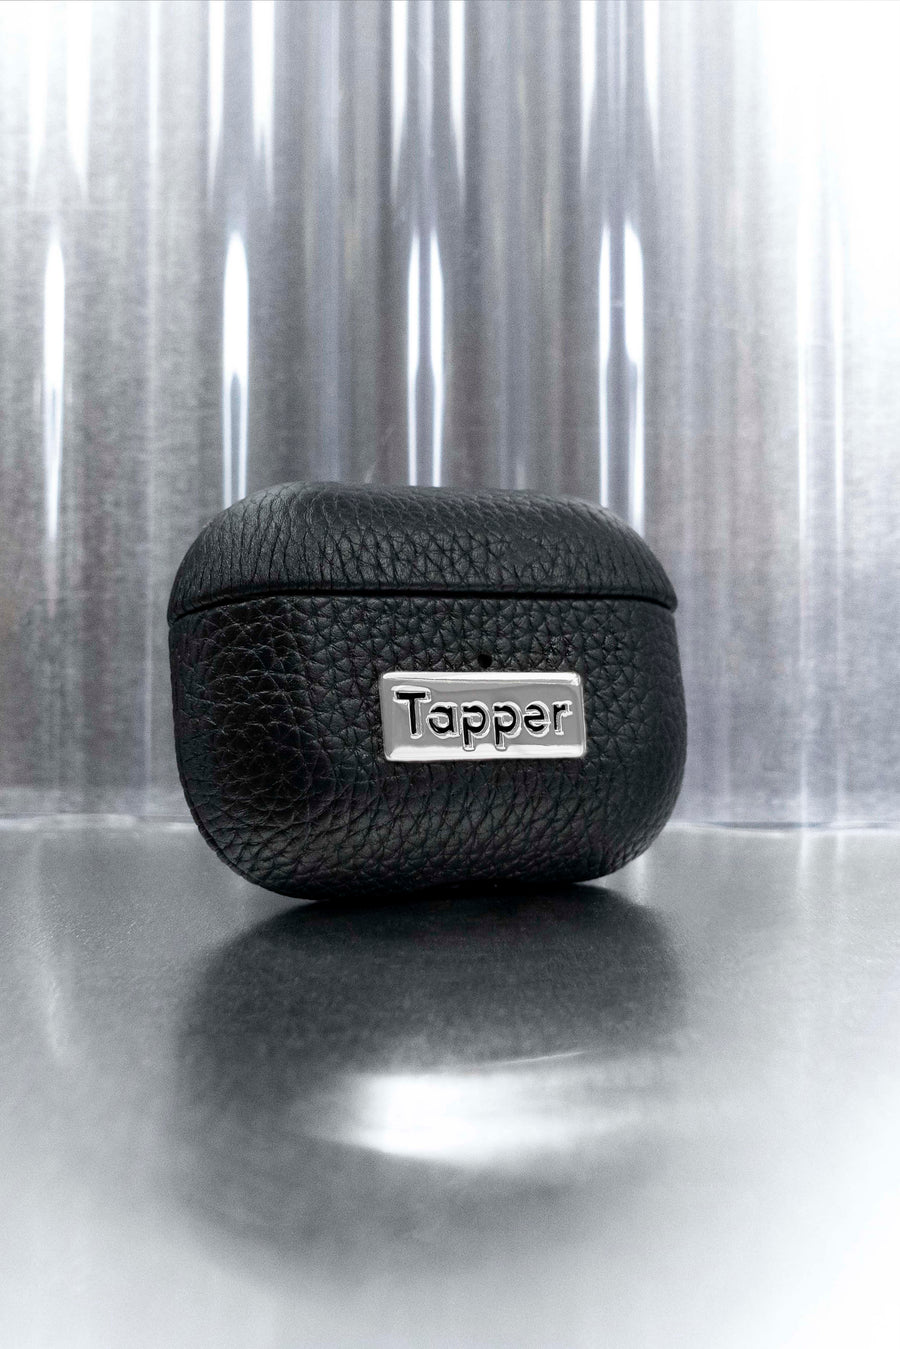 Tapper's luxurious black genuine cow leather AirPods case protects and elevates the look of your AirPods Pro. The luxurious, protective case for AirPods Pro with a metal logo plate colored in silver steps up your AirPods game. The next must-have high end protective Apple AirPods accessory in real leather and metal details. Compatible with AirPods Pro. Designed in Sweden by Tapper. Free Express Shipping at gettapper.com